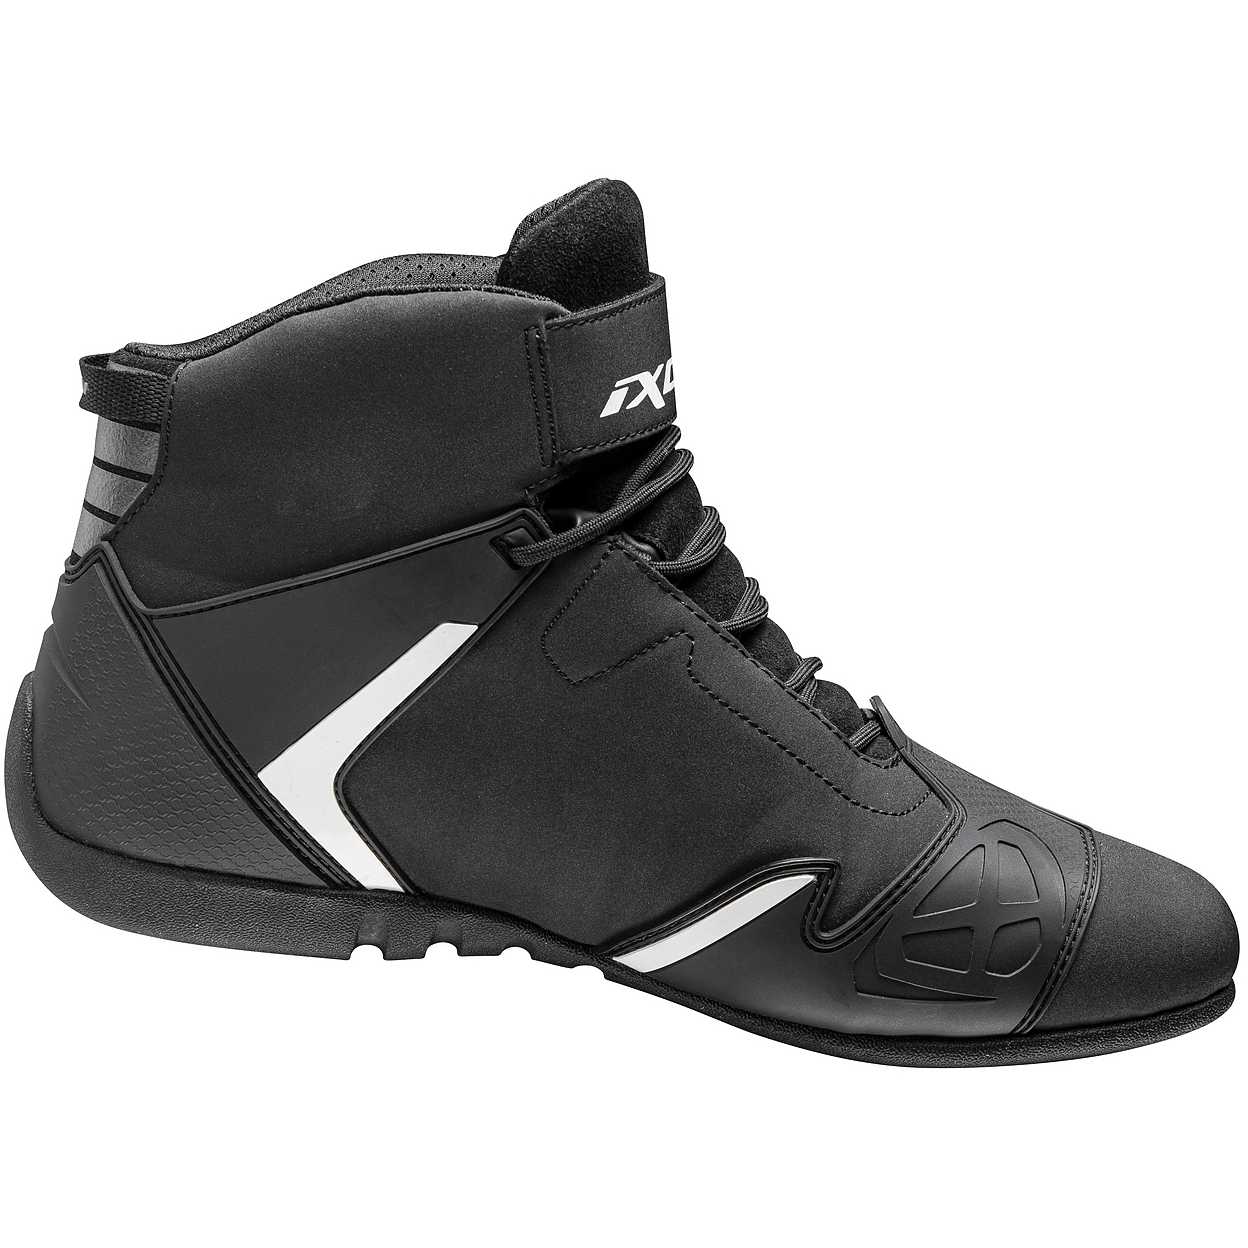 Ixon GAMBLER WP Technical Sport Motorcycle Shoes Black White For Sale ...